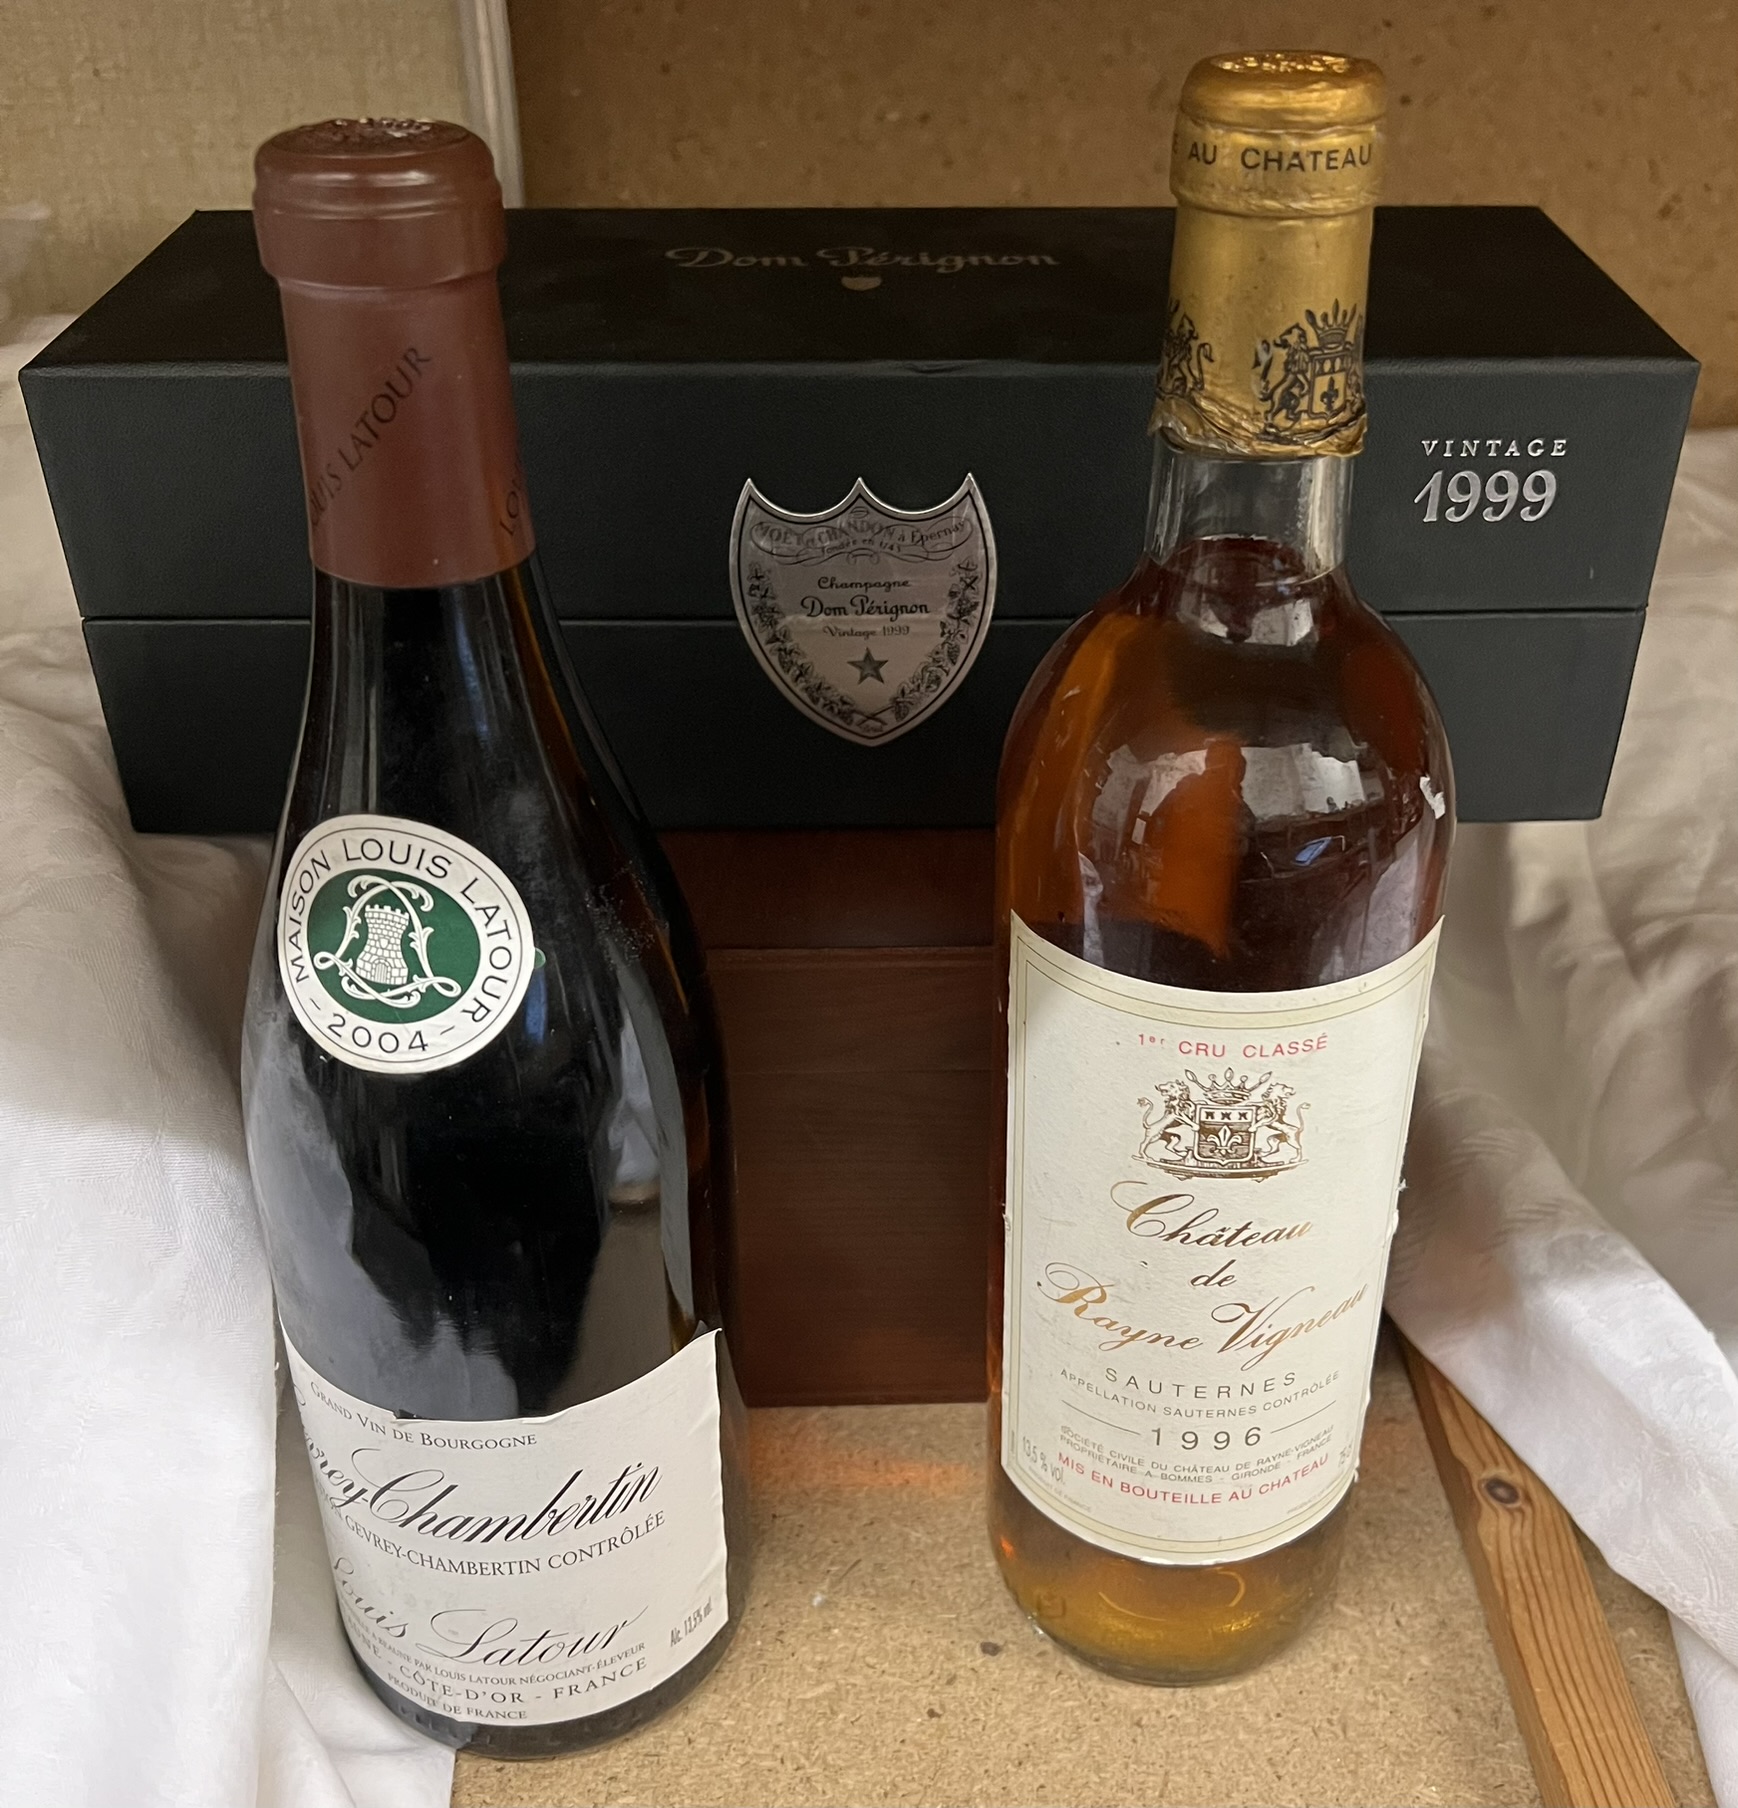 A bottle of 1999 Dom Perignon together with a bottle of Gevrey Chambertin and a 1996 Chateau de